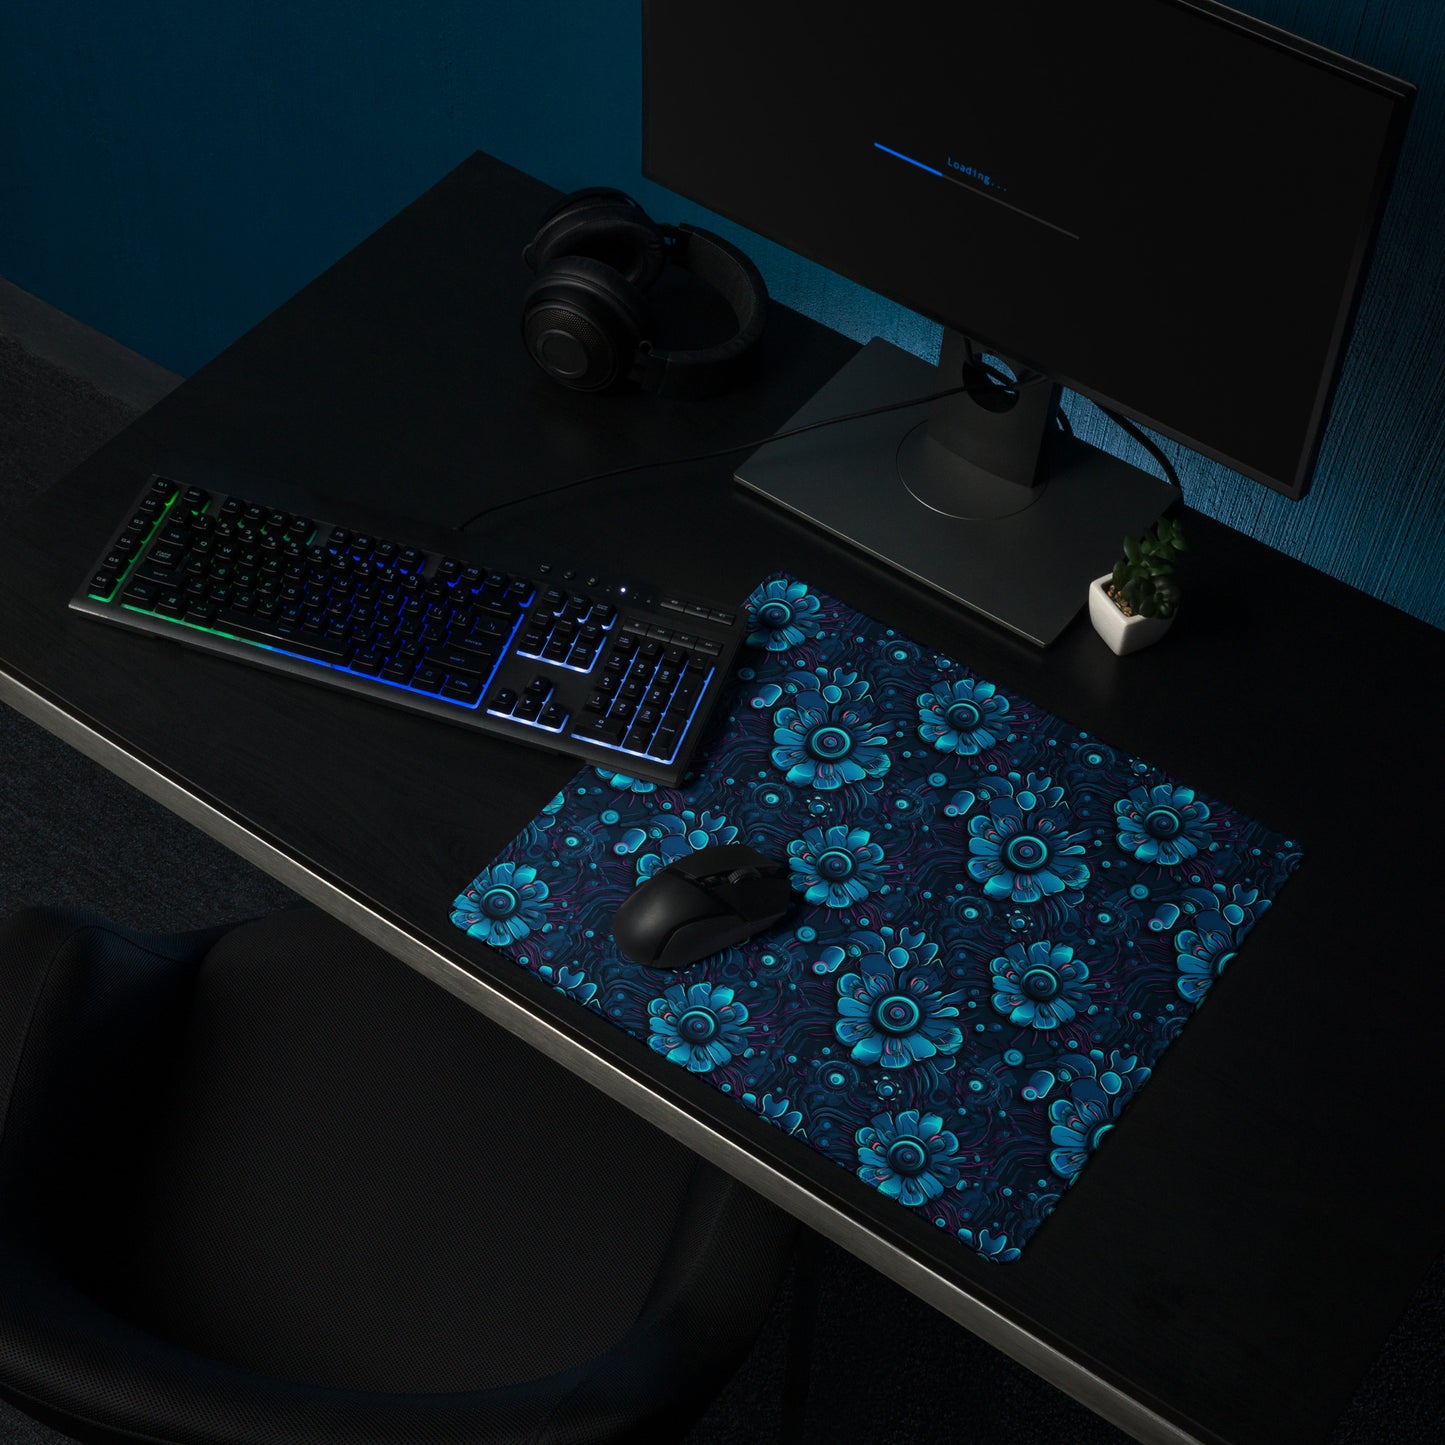 A 18" x 16" desk pad with a blue robotic floral pattern sitting on a desk.